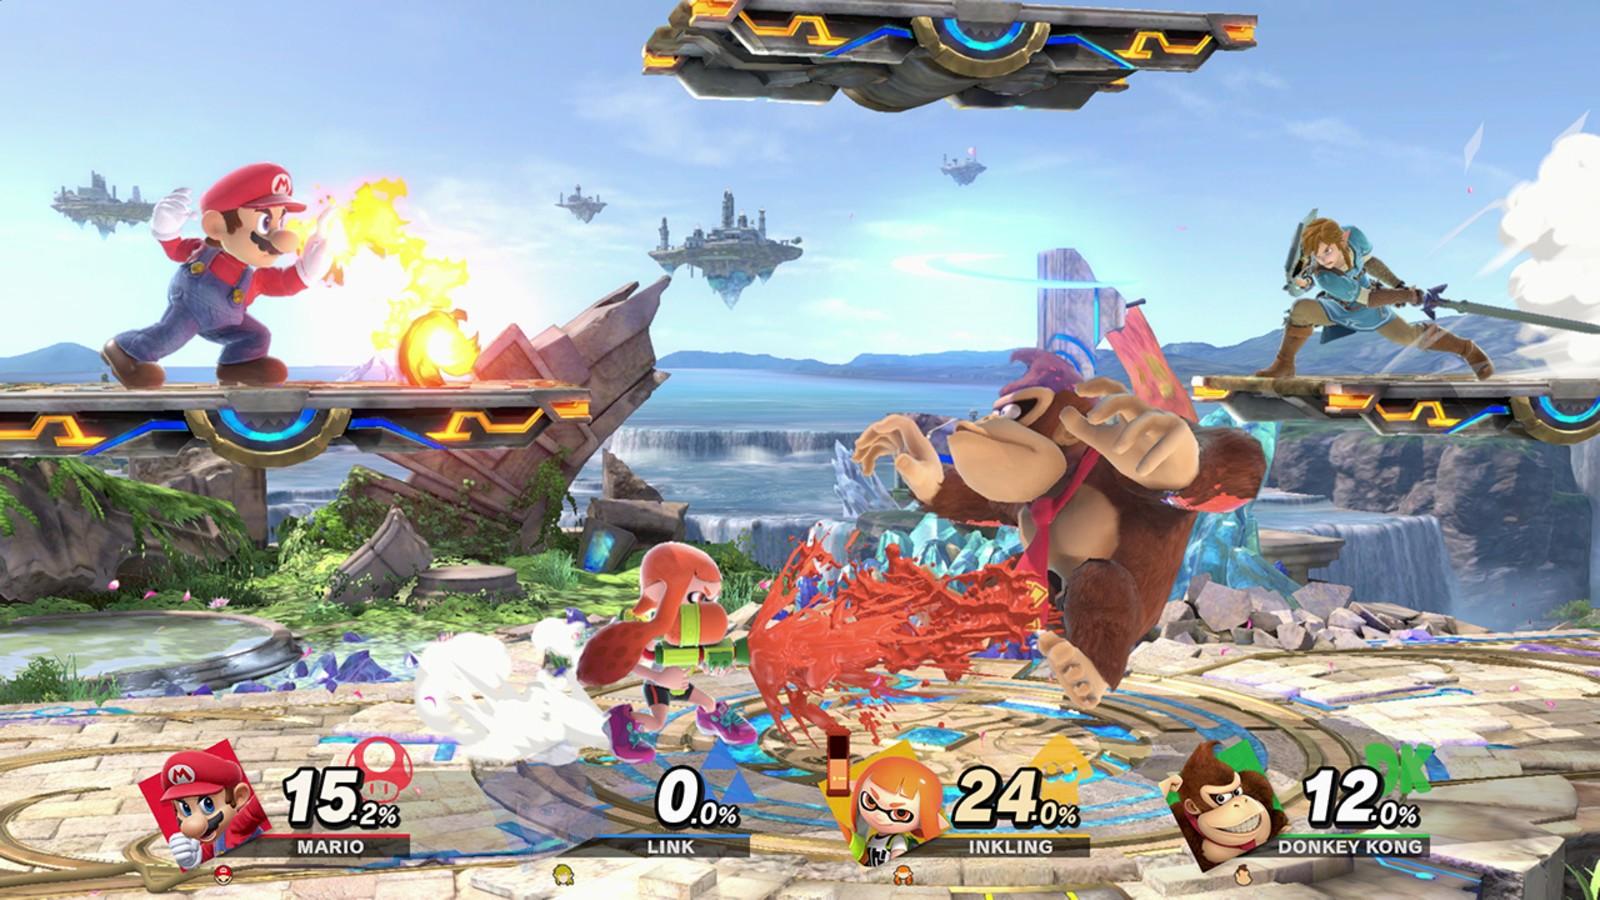 Super Smash Bros. Ultimate 2.0.2 Update To Release Today